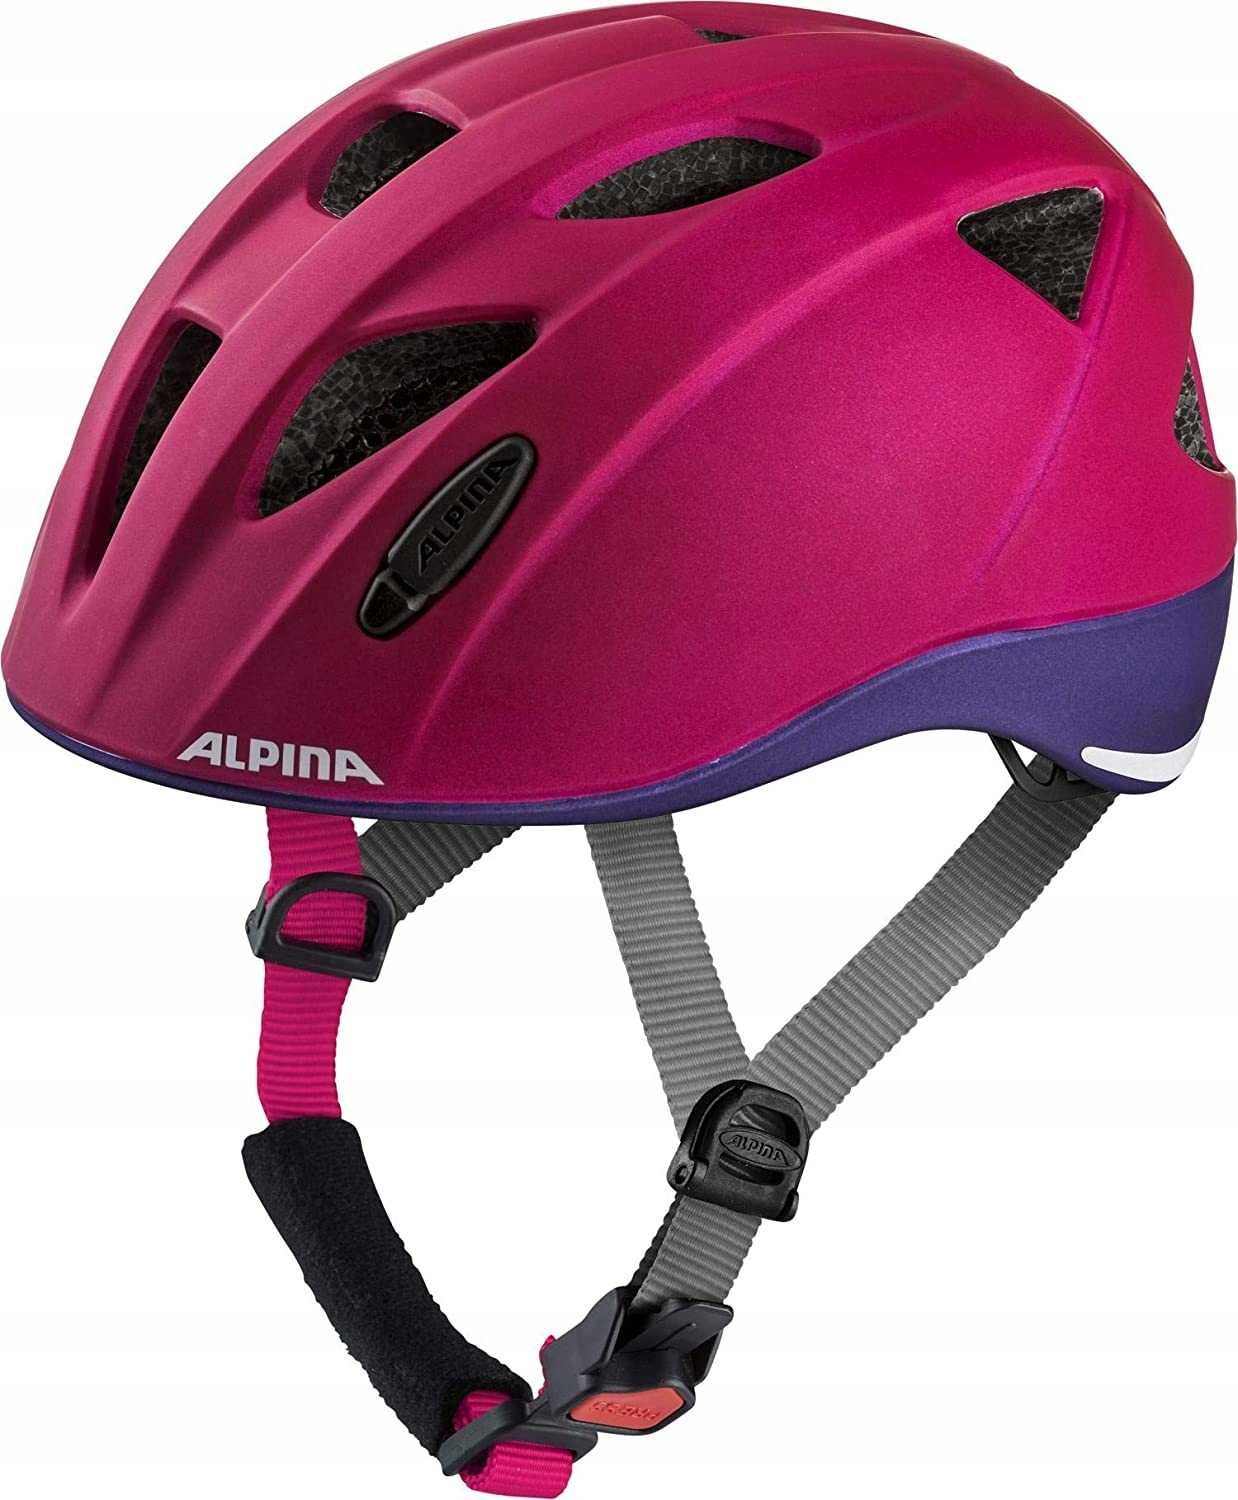 Kask rowerowy Alpina XIMO L.E. r. S 49-54cm